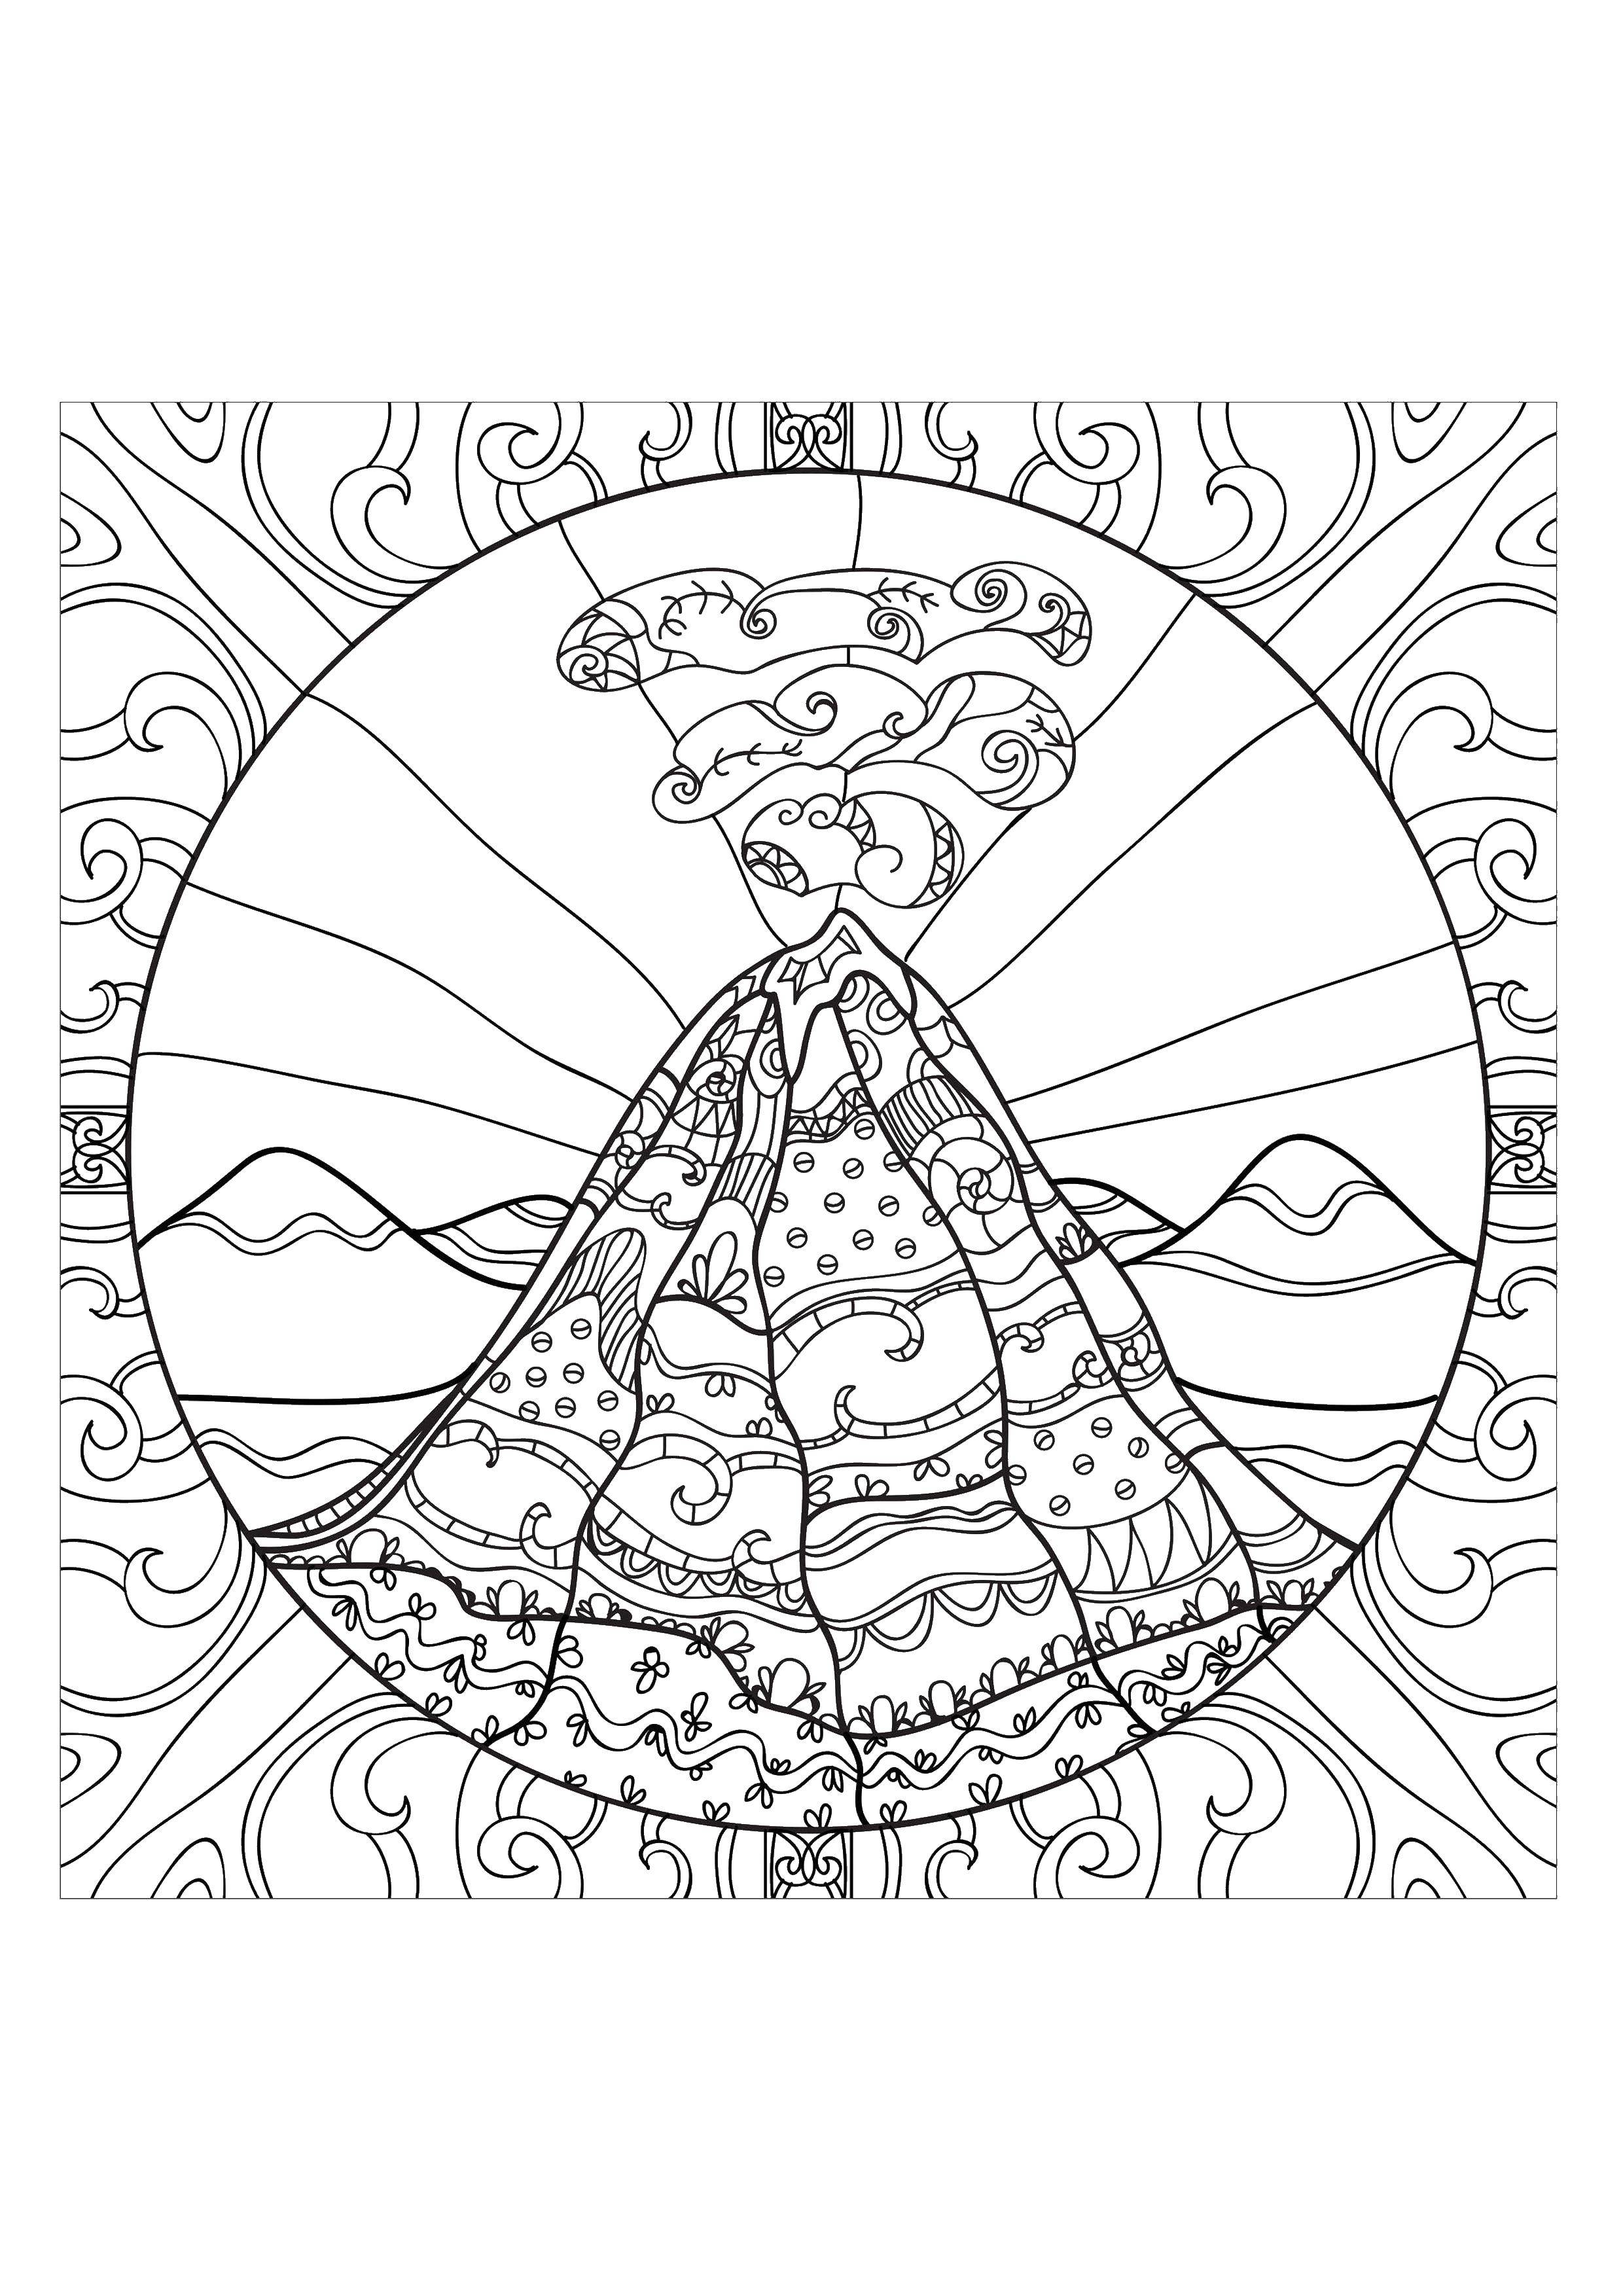 Coloring Patterned volcano. Category Volcano. Tags:  Volcano, nature.